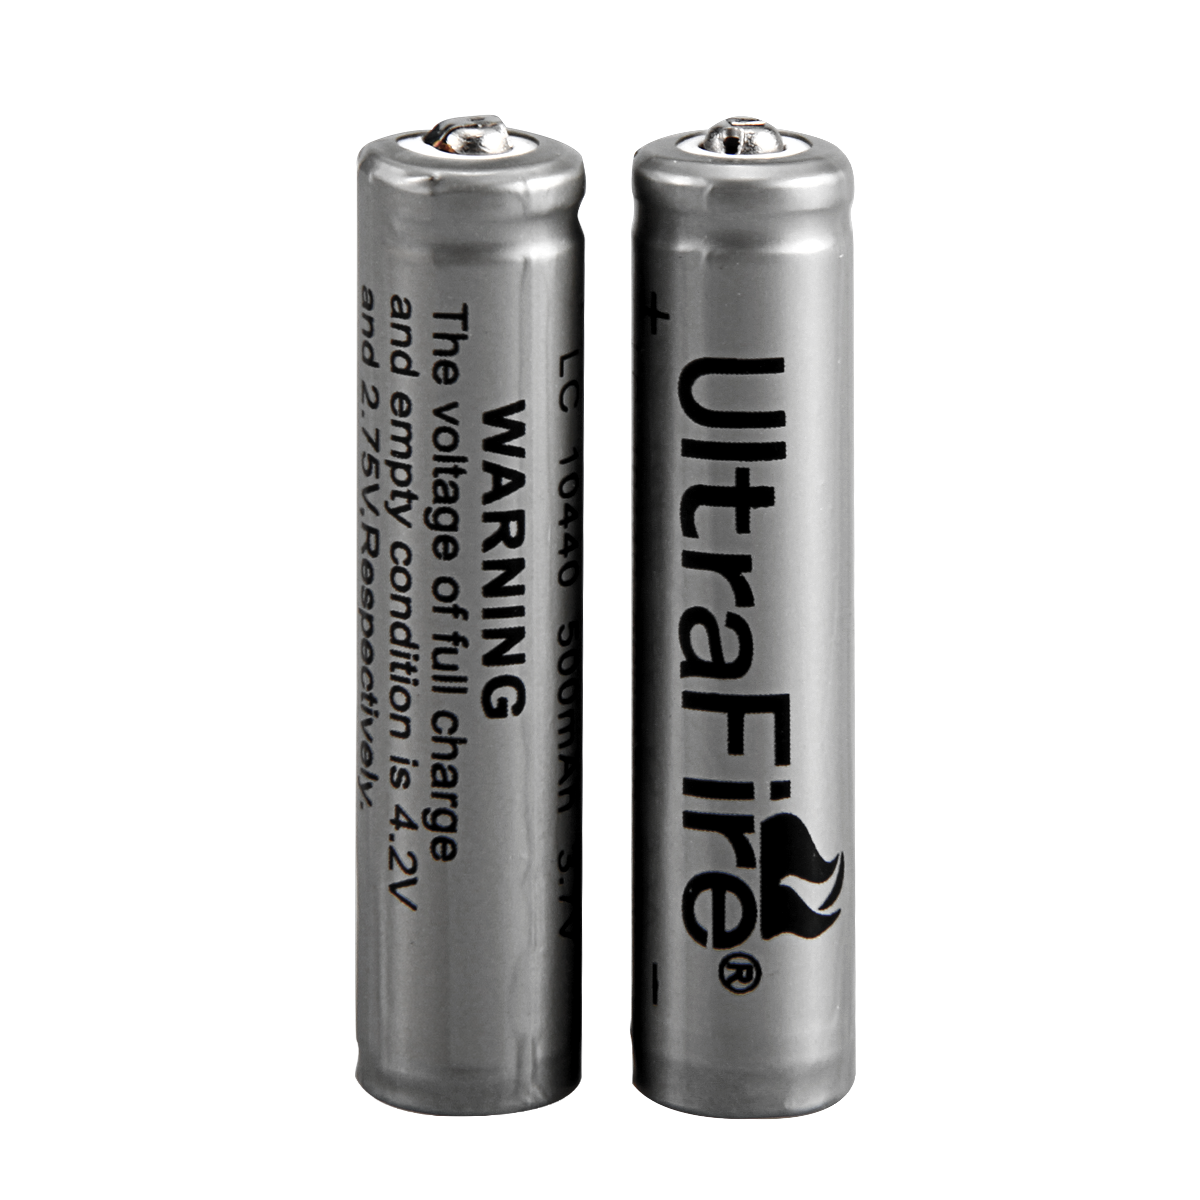 UltraFire 500mAh 3.7V 10440 Rechargeable Lithium Battery